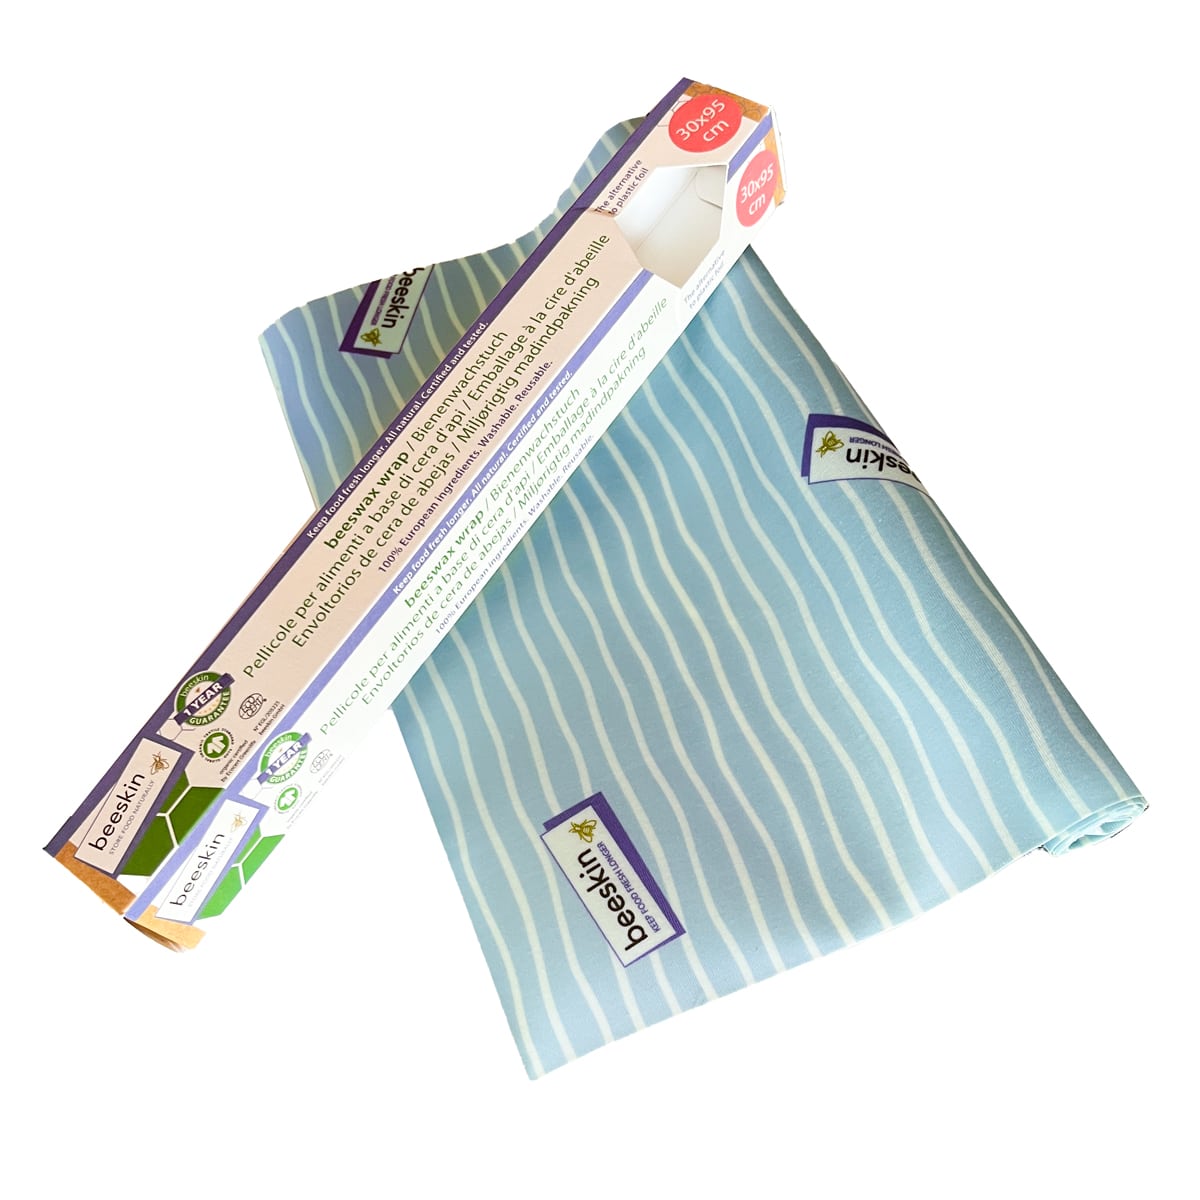 beeskin beeswax wrap roll-30x95cm - with packaging